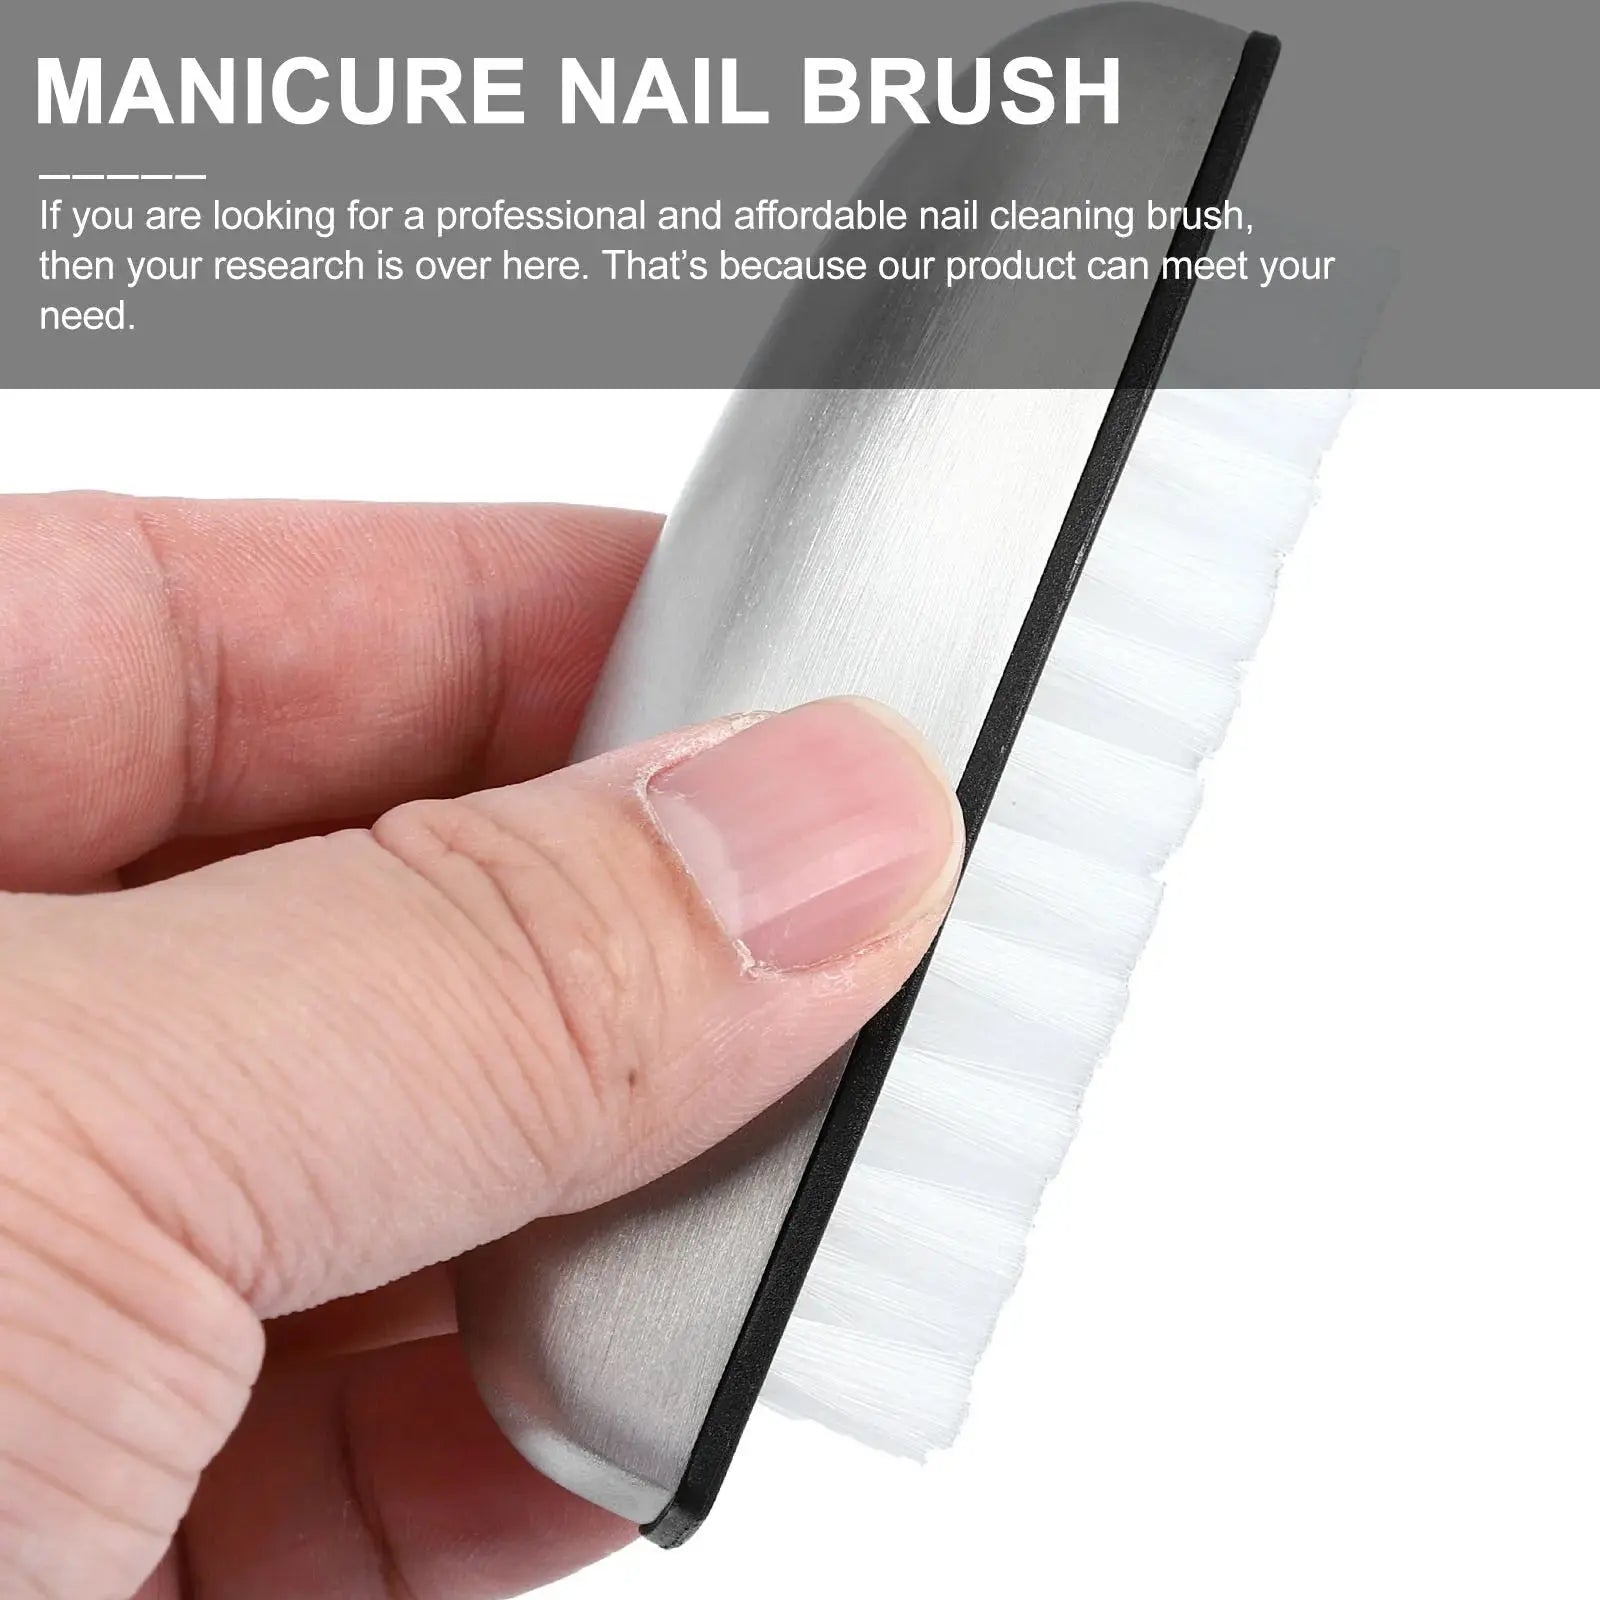 Brush Nail Cleaning Hand Cleaner Scrubber Manicure Scrub Scrubbing Fingernail Toes Finger Metal Washing Nails BrothersCarCare